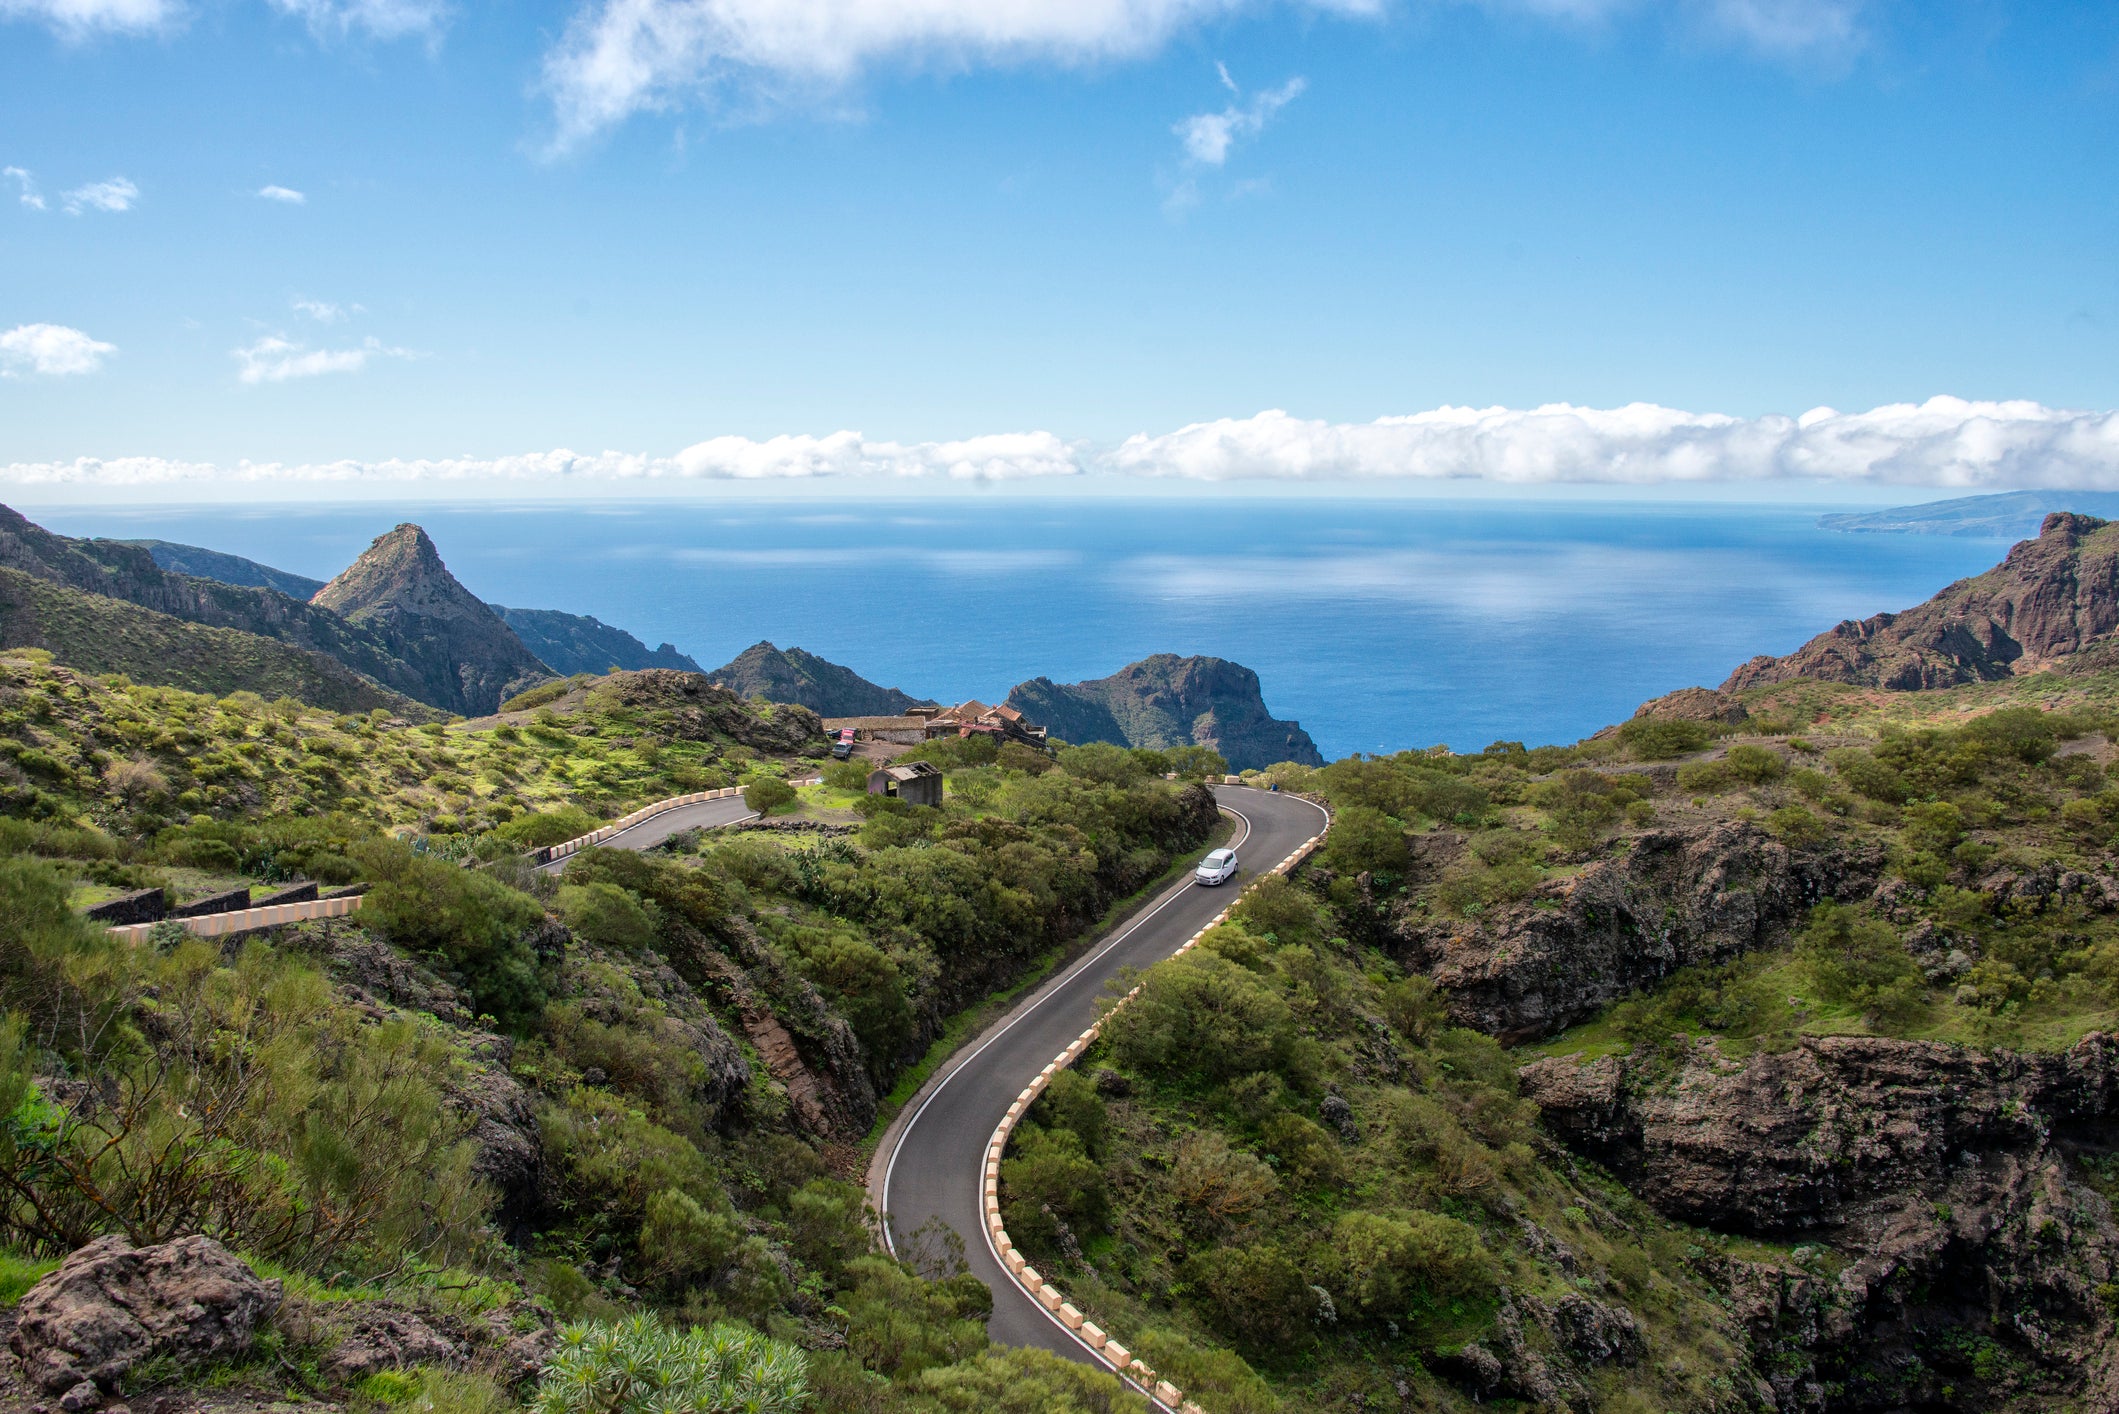 7 reasons why you need to visit Spain’s Canary Islands this summer